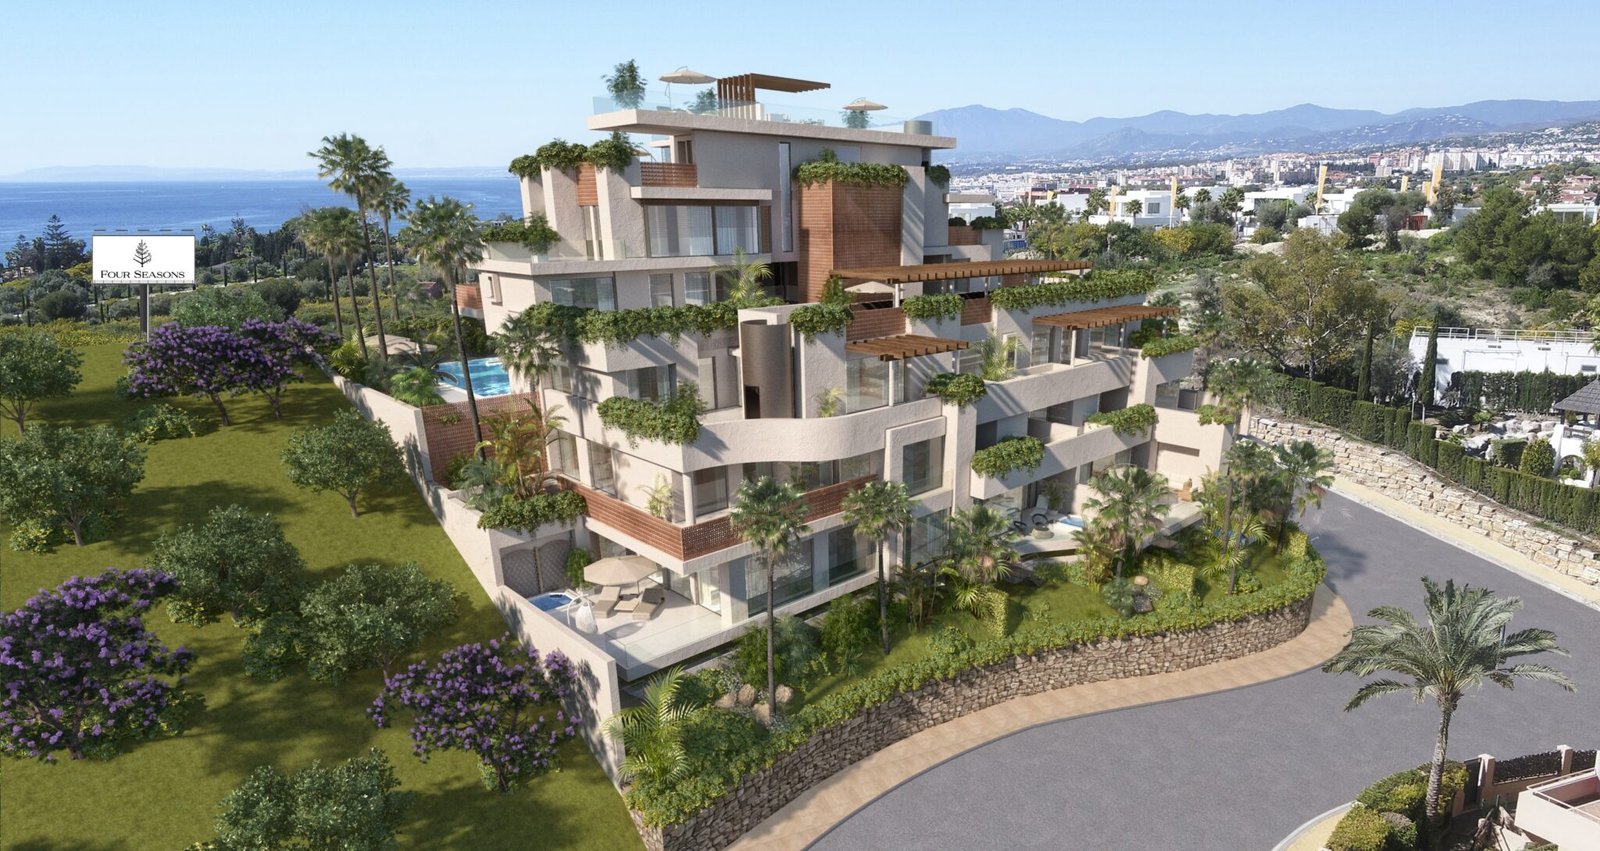 2-3 Bedroom apartments located in Marbella East, in front of Four Seasons Resort